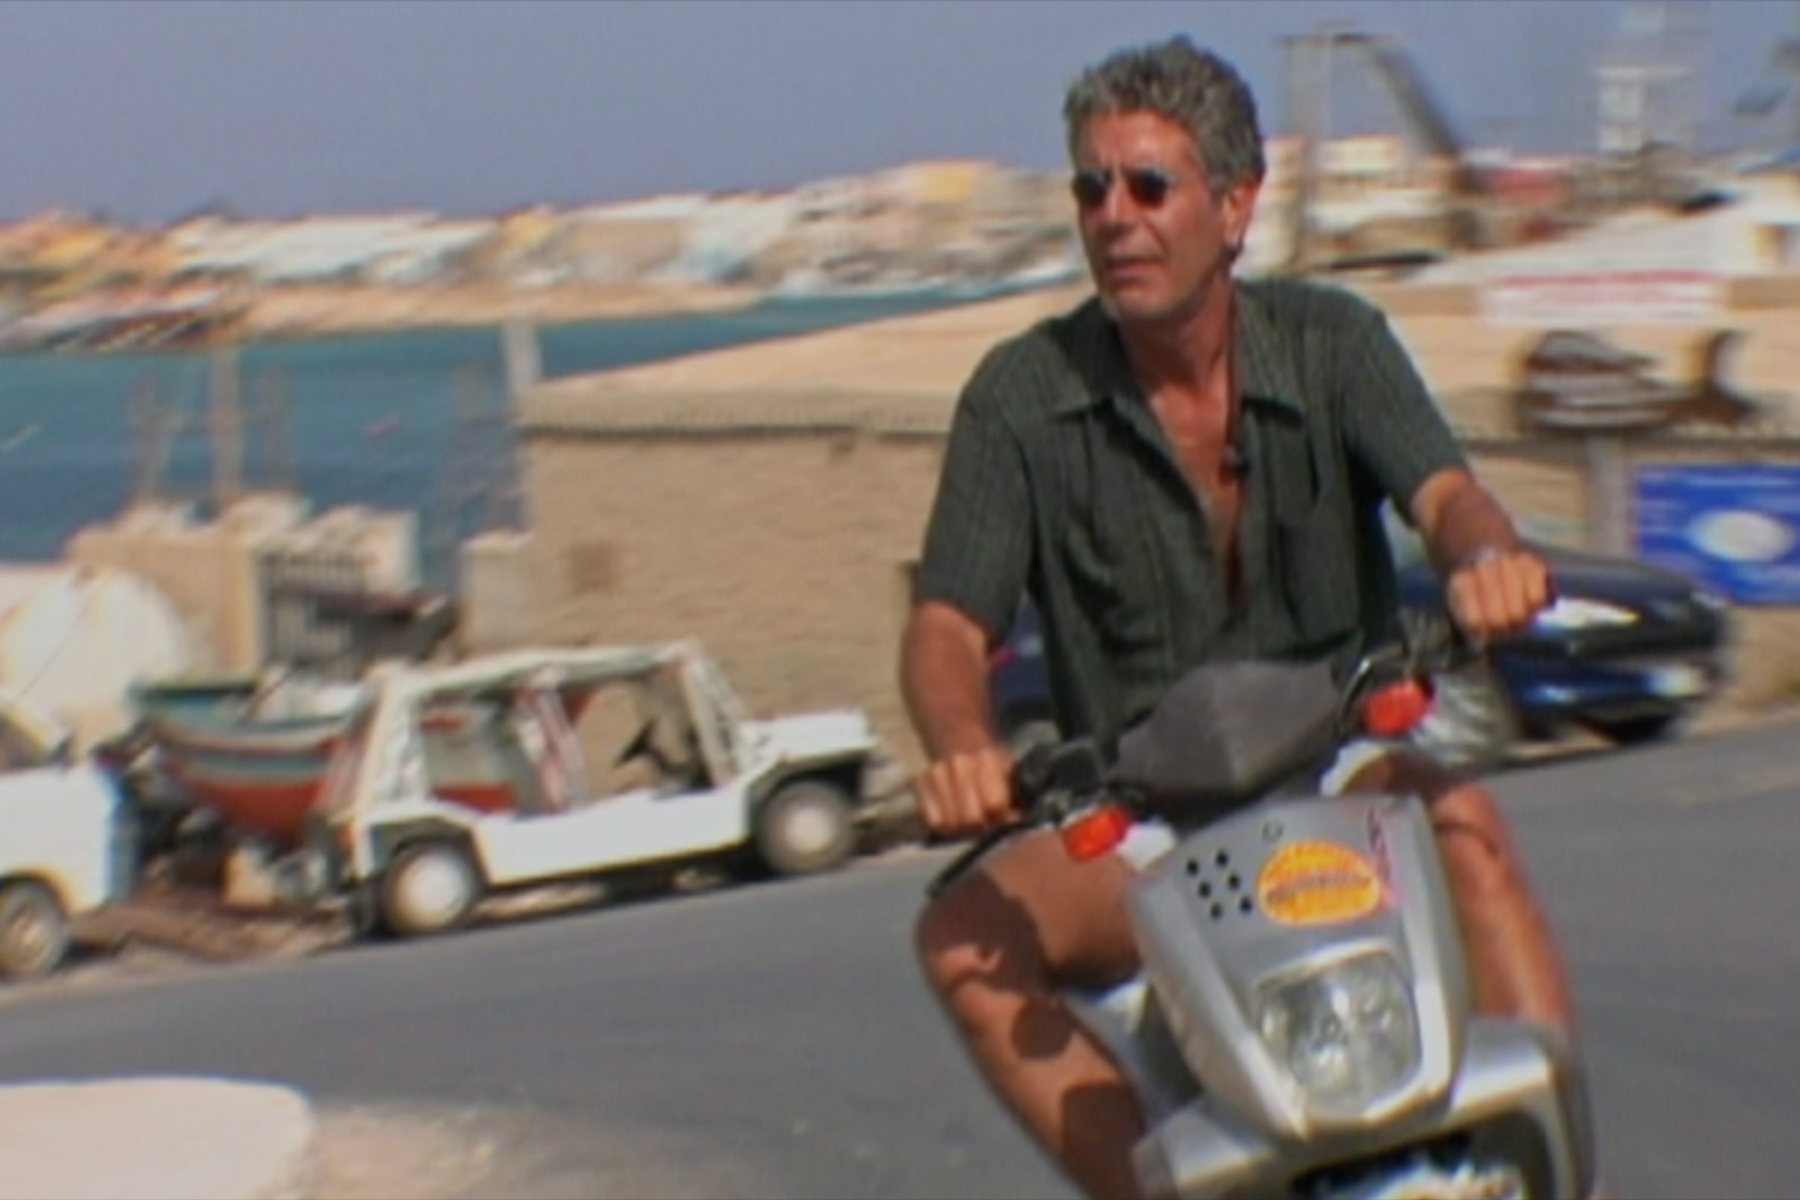 Anthony Bourdain stars in Morgan Neville’s documentary ROADRUNNER, a Focus Features release. Credit: Discovery Access / Focus Features